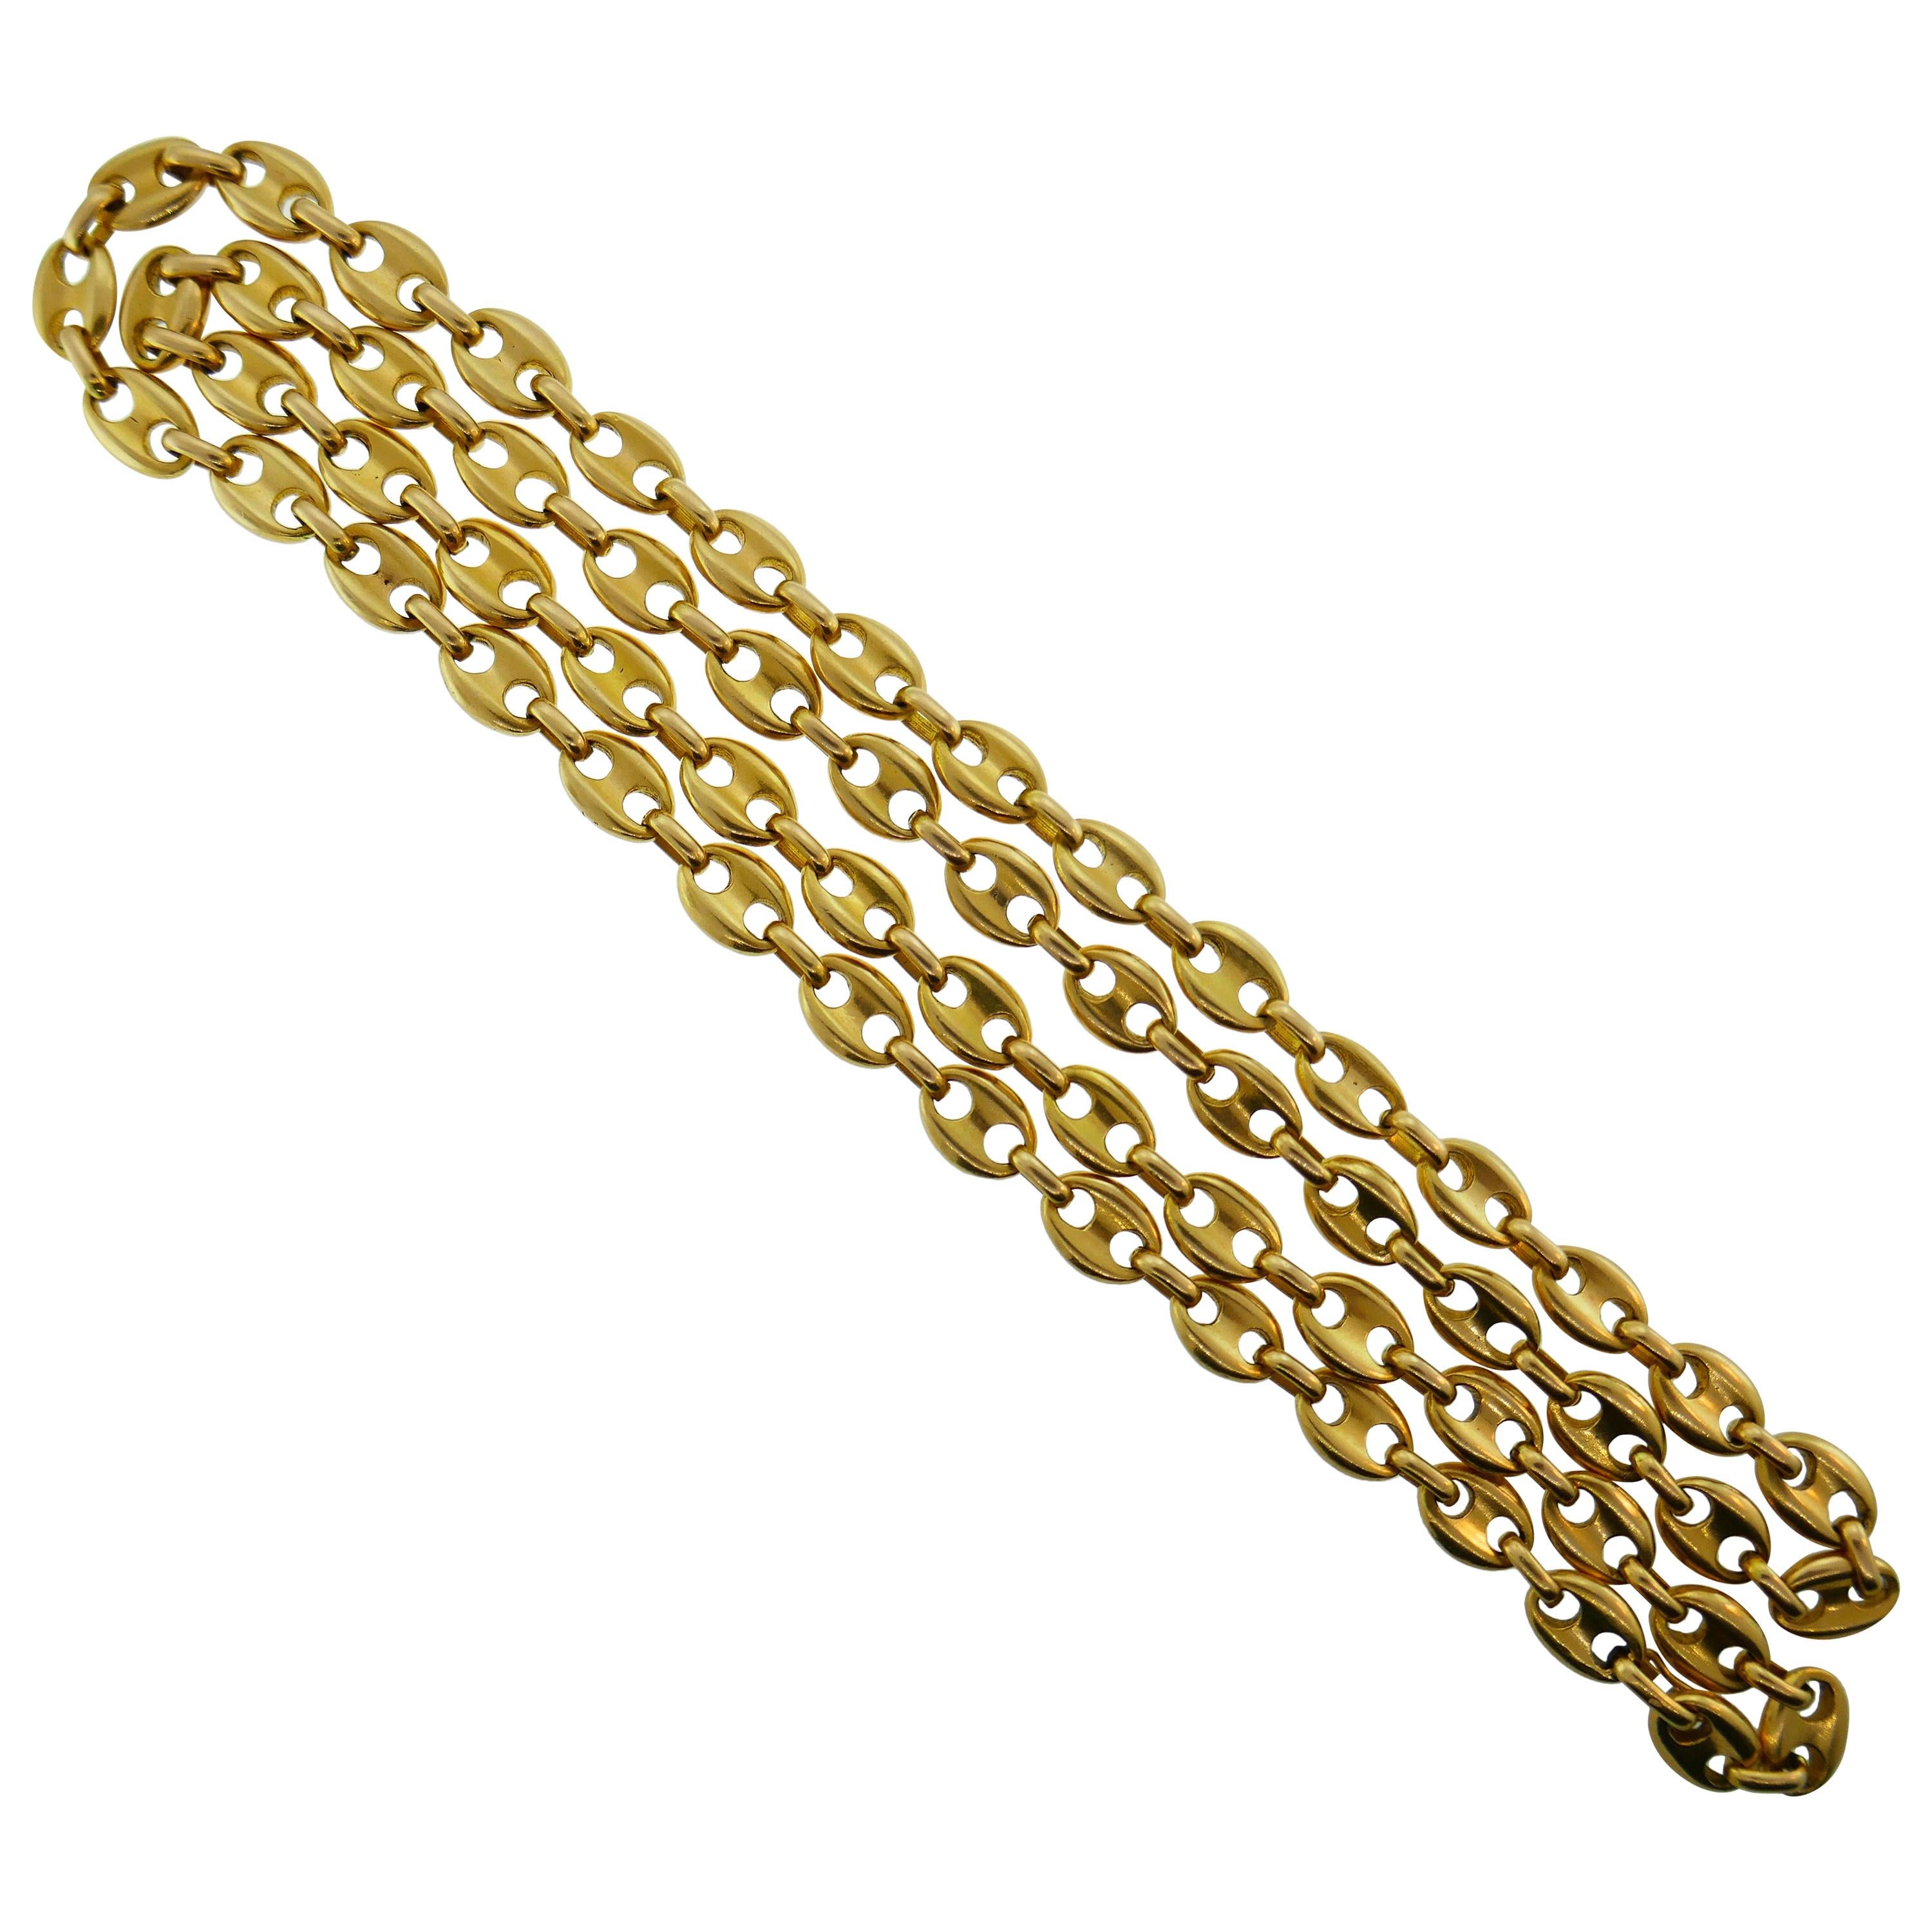 Made in France 18 Karat Yellow Gold Mariner Chain Necklace Vintage, circa 1970s